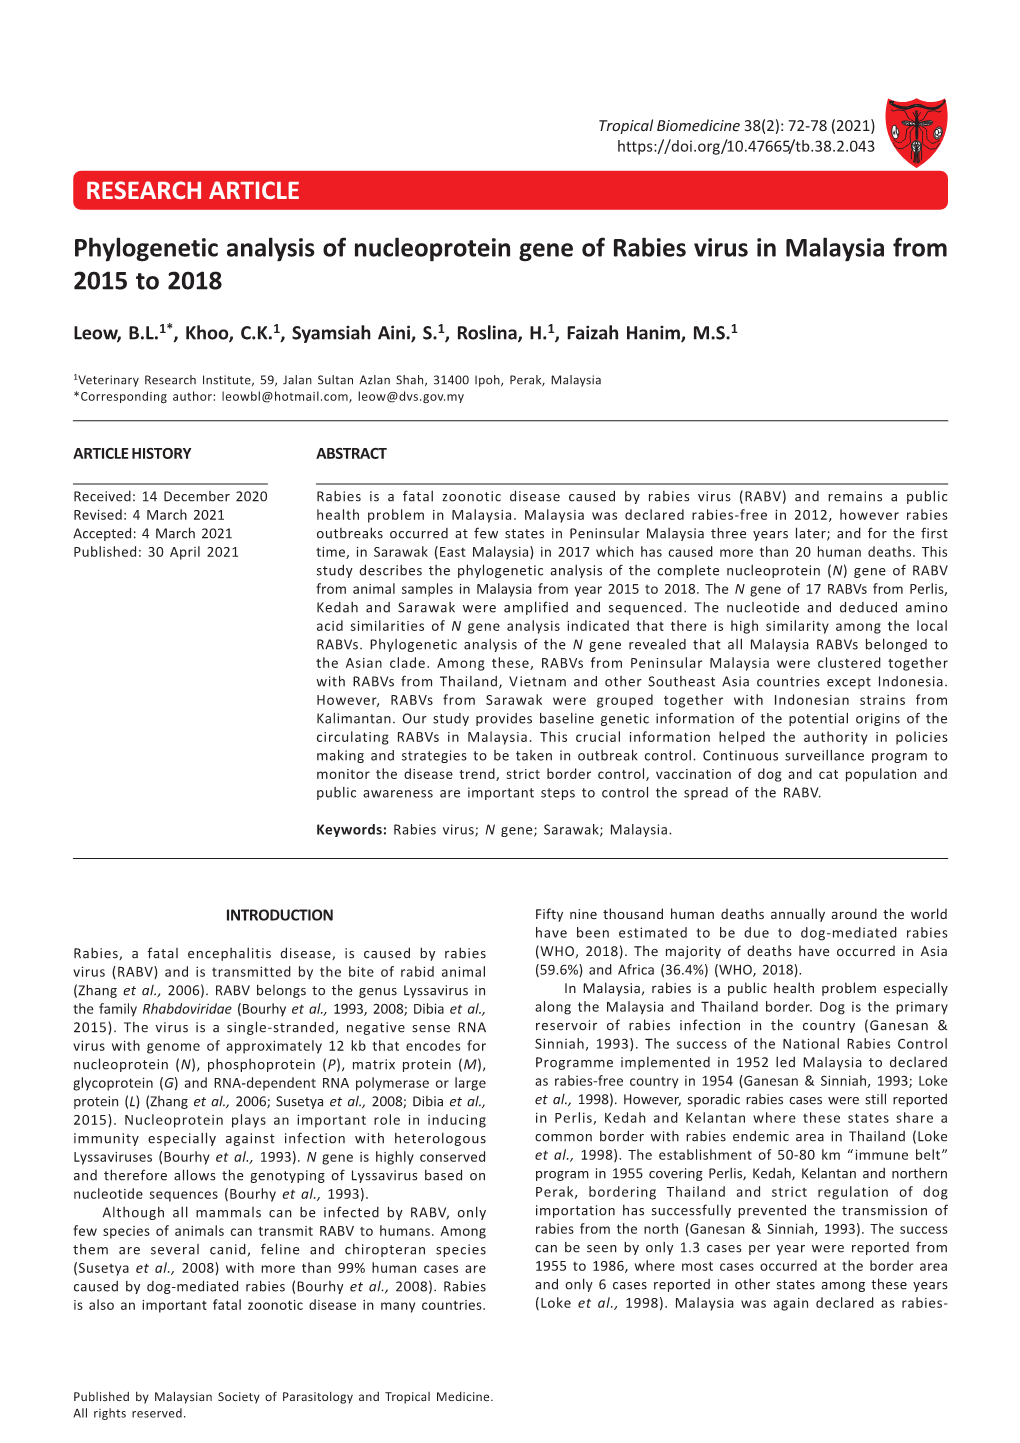 RESEARCH ARTICLE Phylogenetic Analysis of Nucleoprotein Gene Of